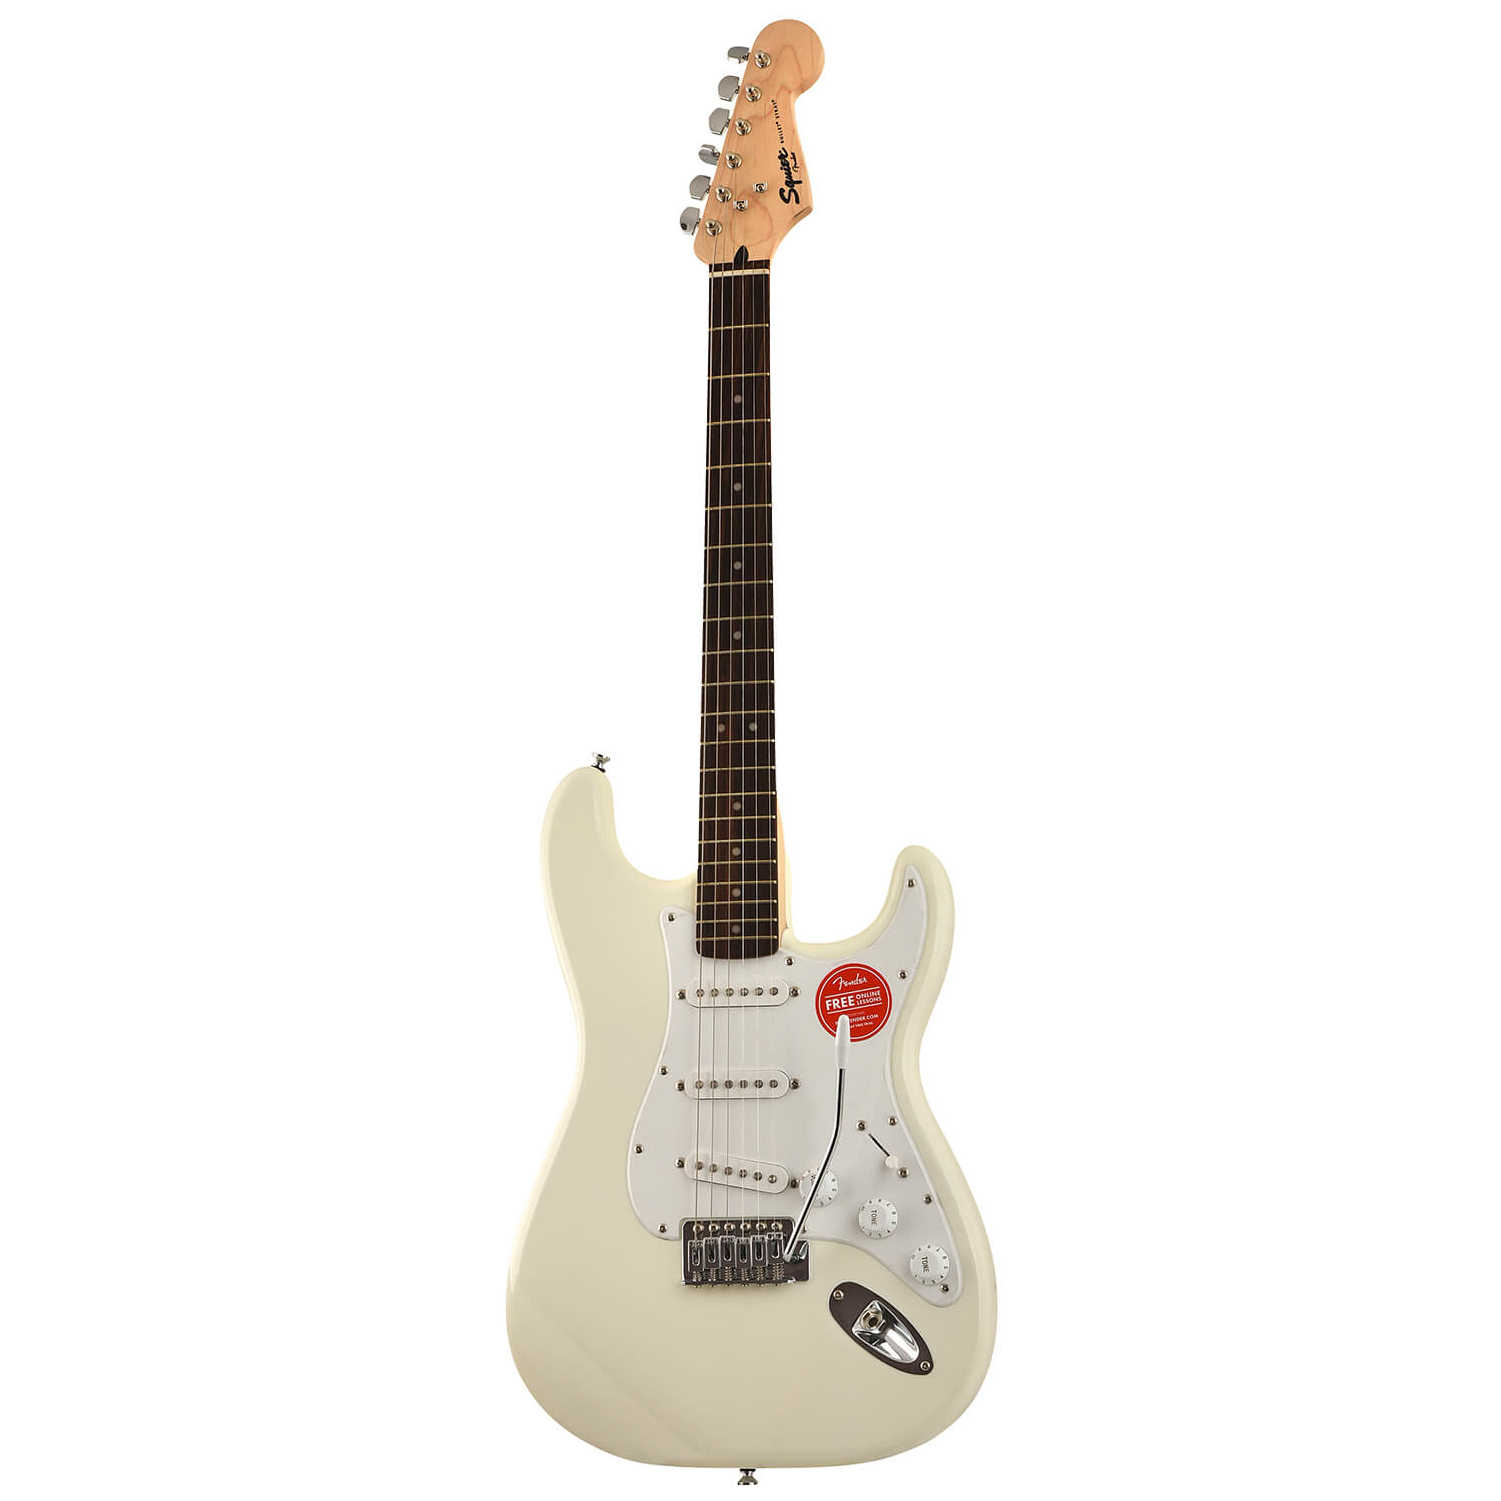 Squier by Fender Bullet Stratocaster IL AW